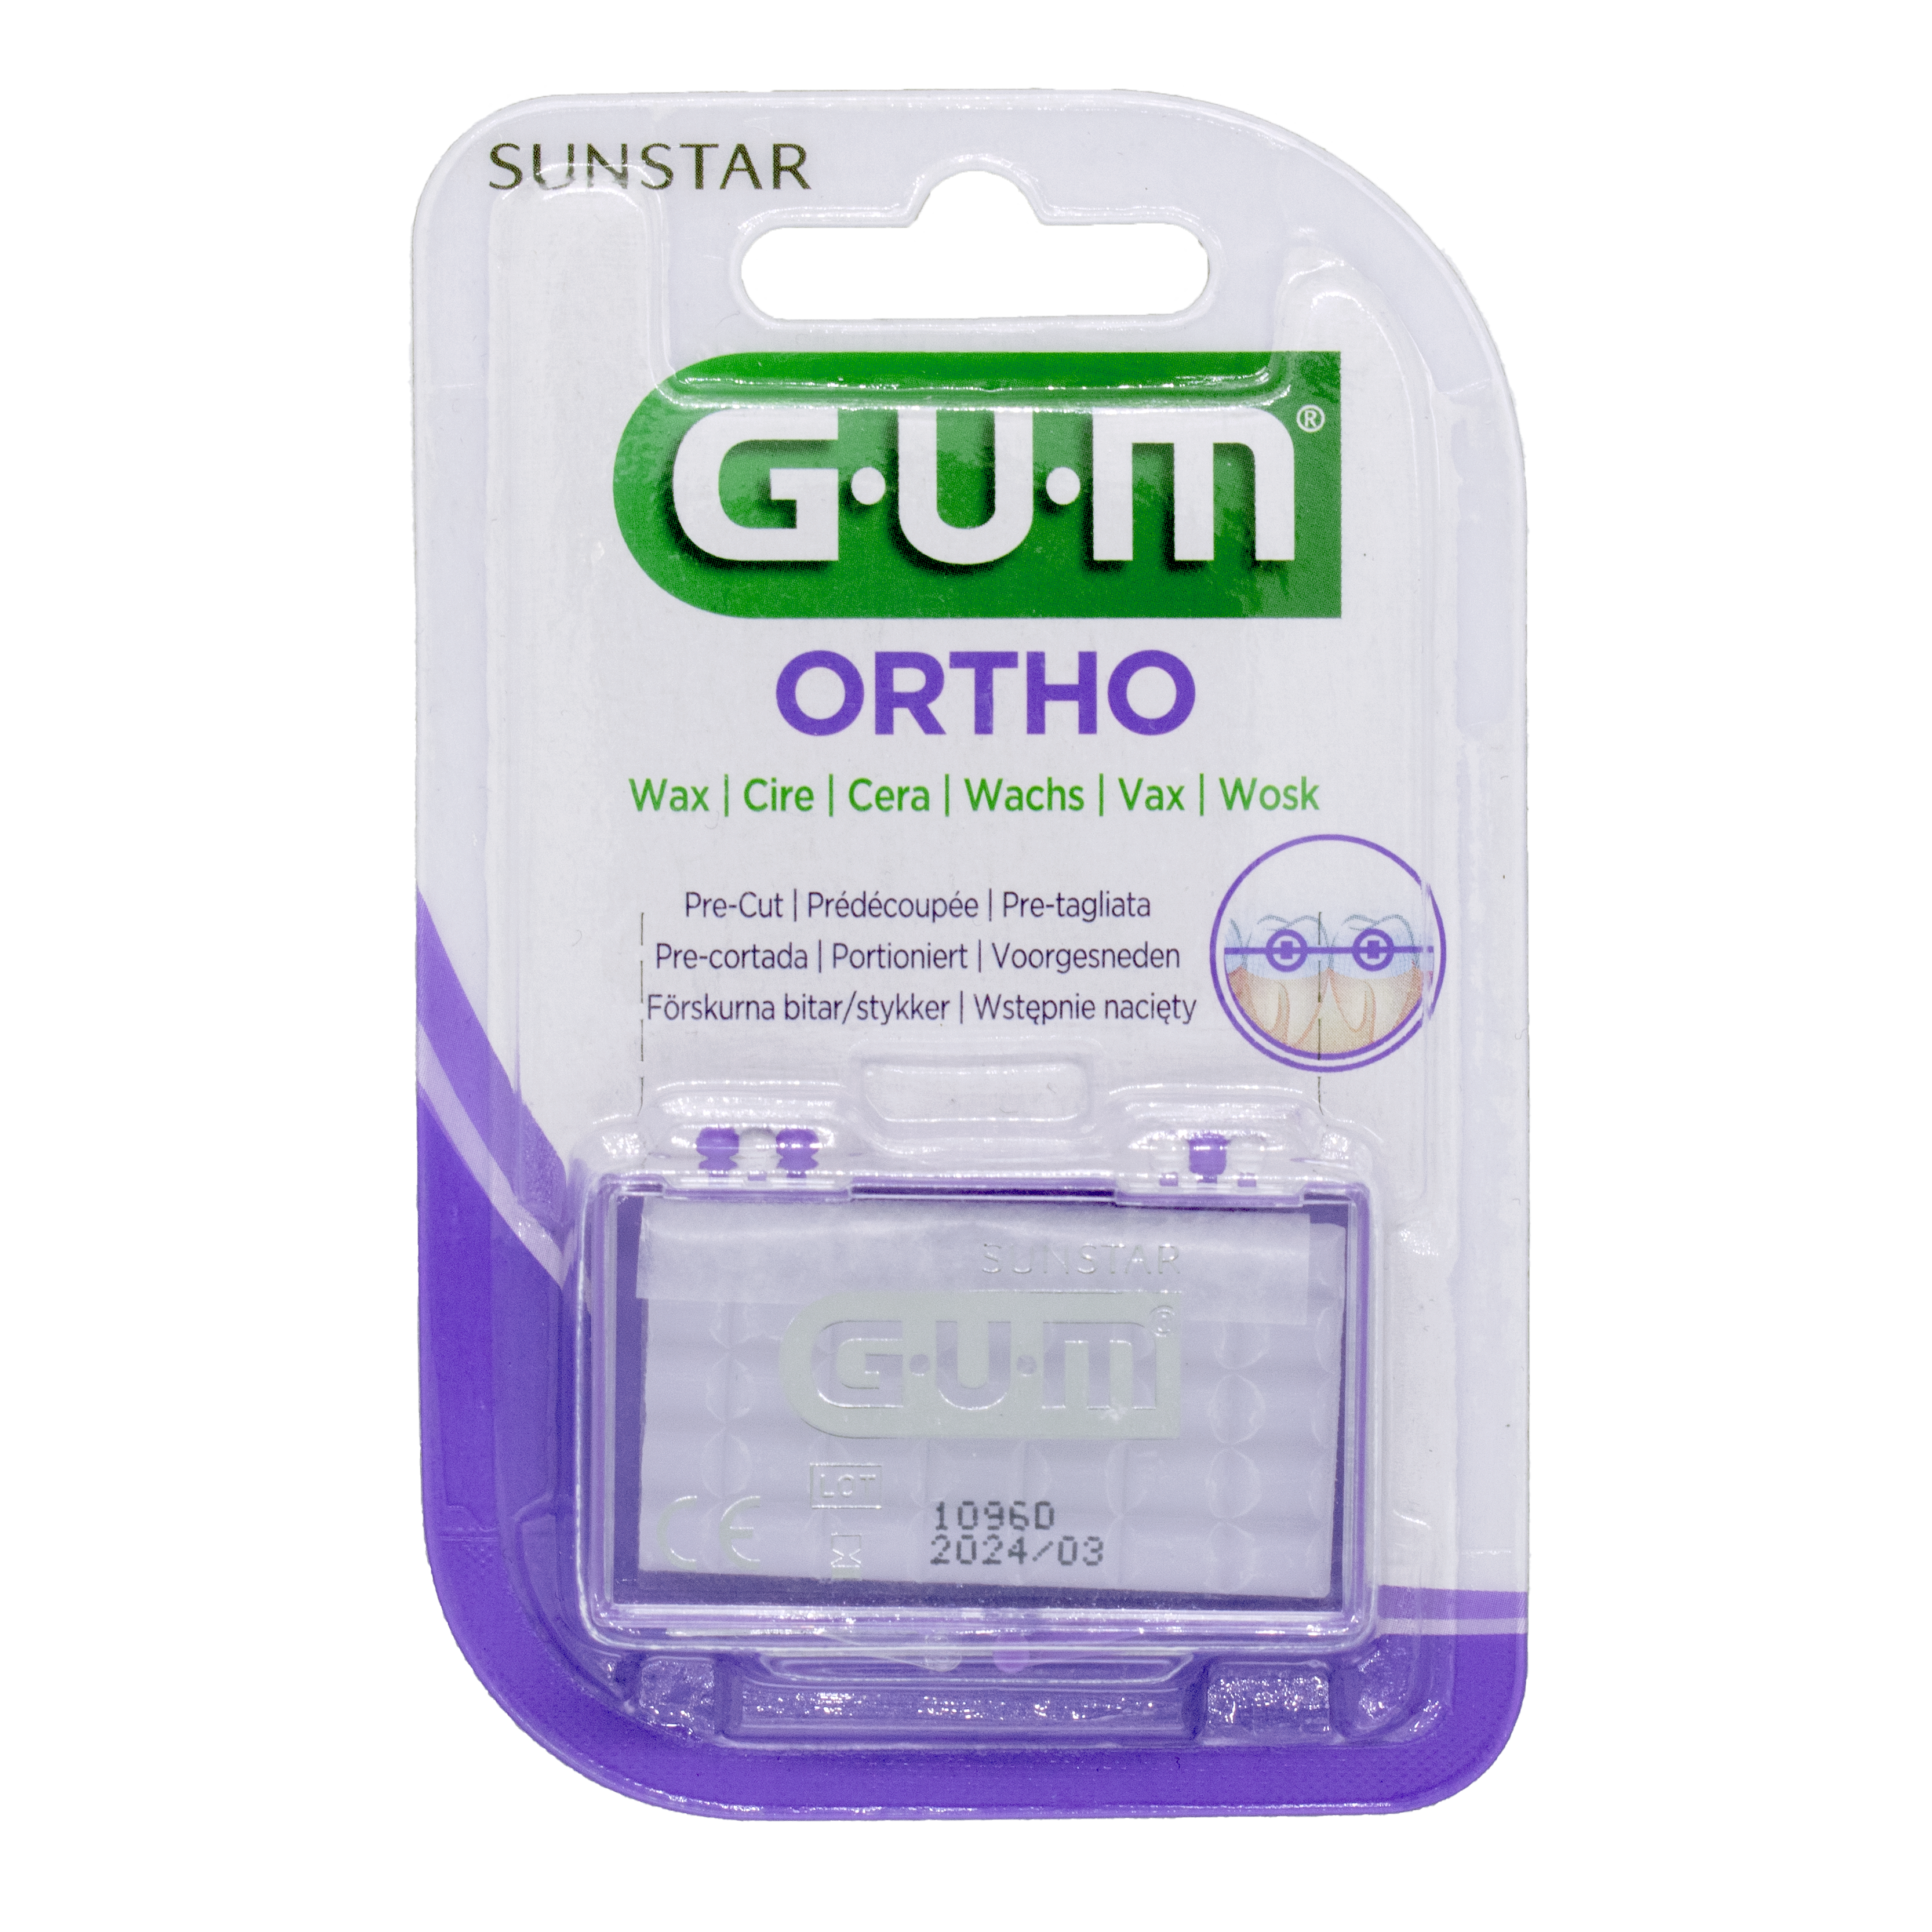 723-GUM-ORTHO-Wax-Blister-Front